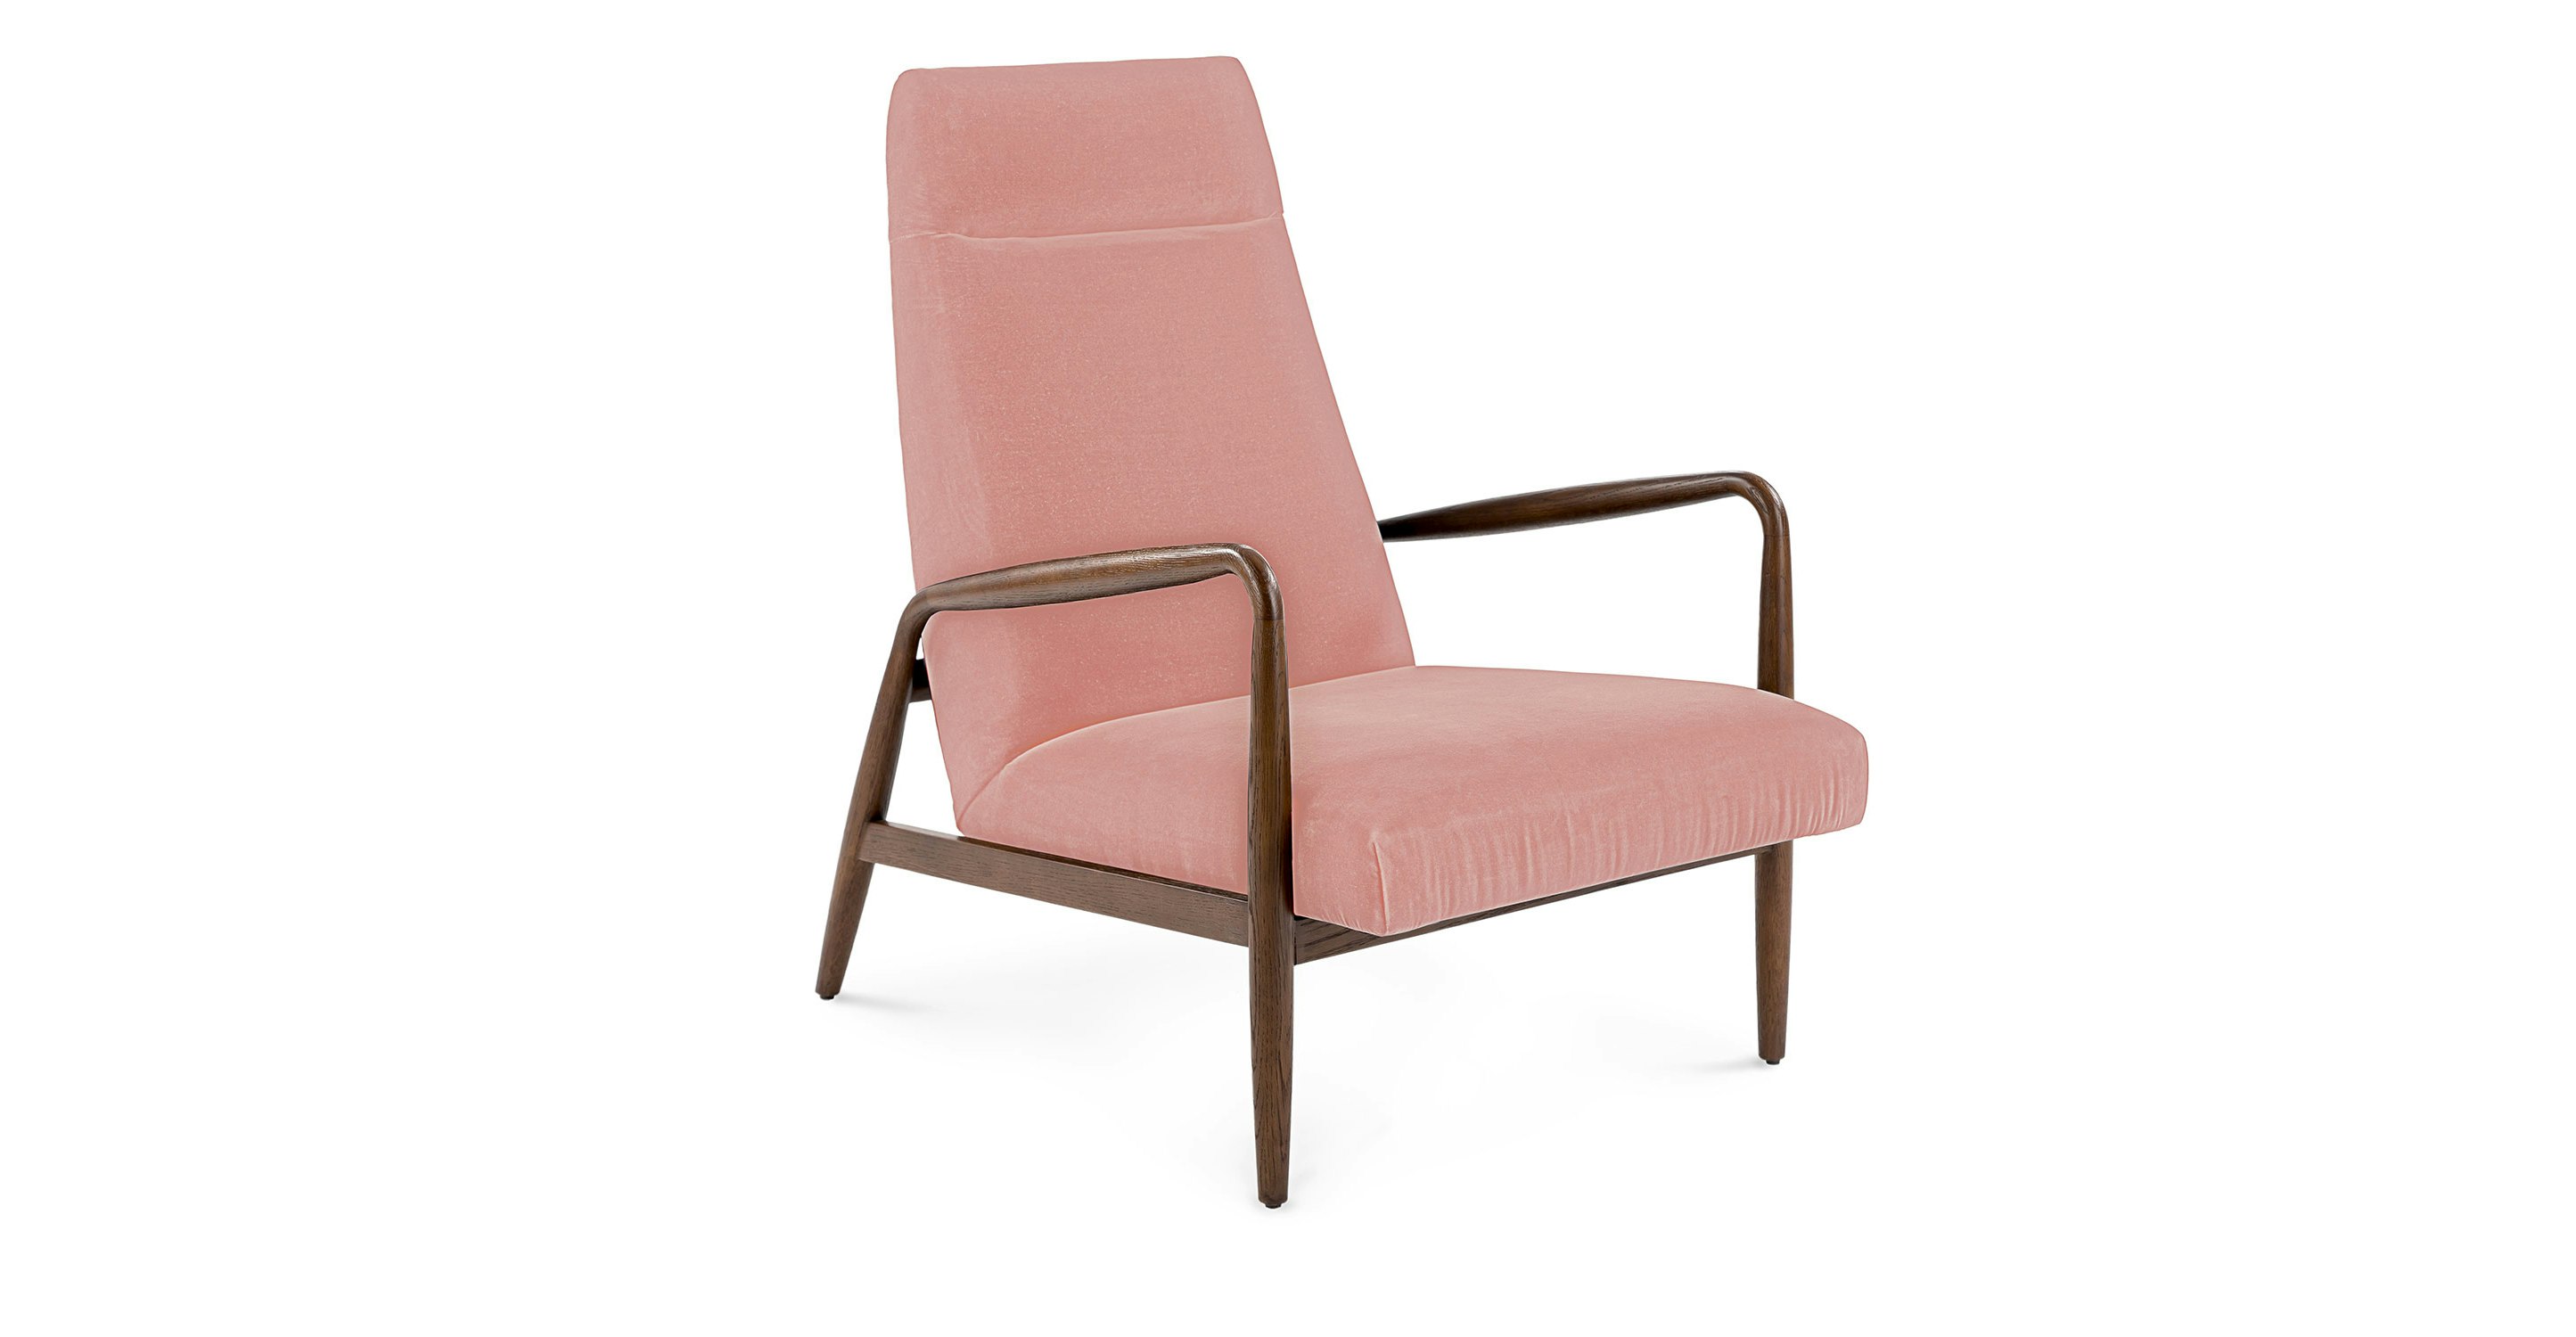 Pender Blush Pink Chair Article